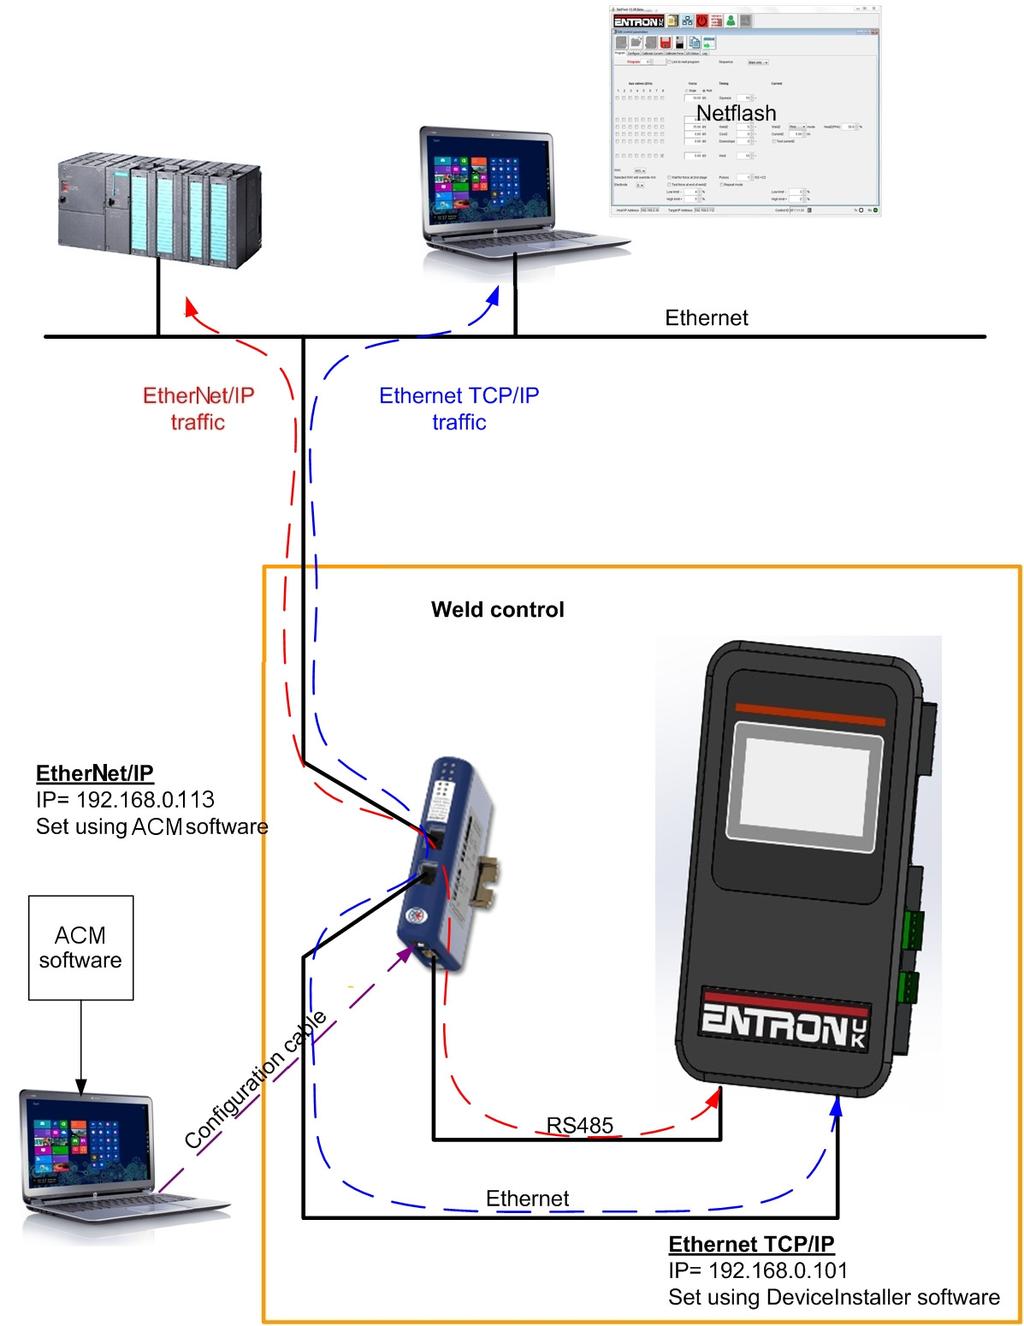 EN7000 & Anybus Communicator EIP/MODBUS-RTU user guide 1 This document describes how to use the HMS Anybus Communicator (ABC) with an EN7000 to control the I/O via EtherNetIP (EIP).